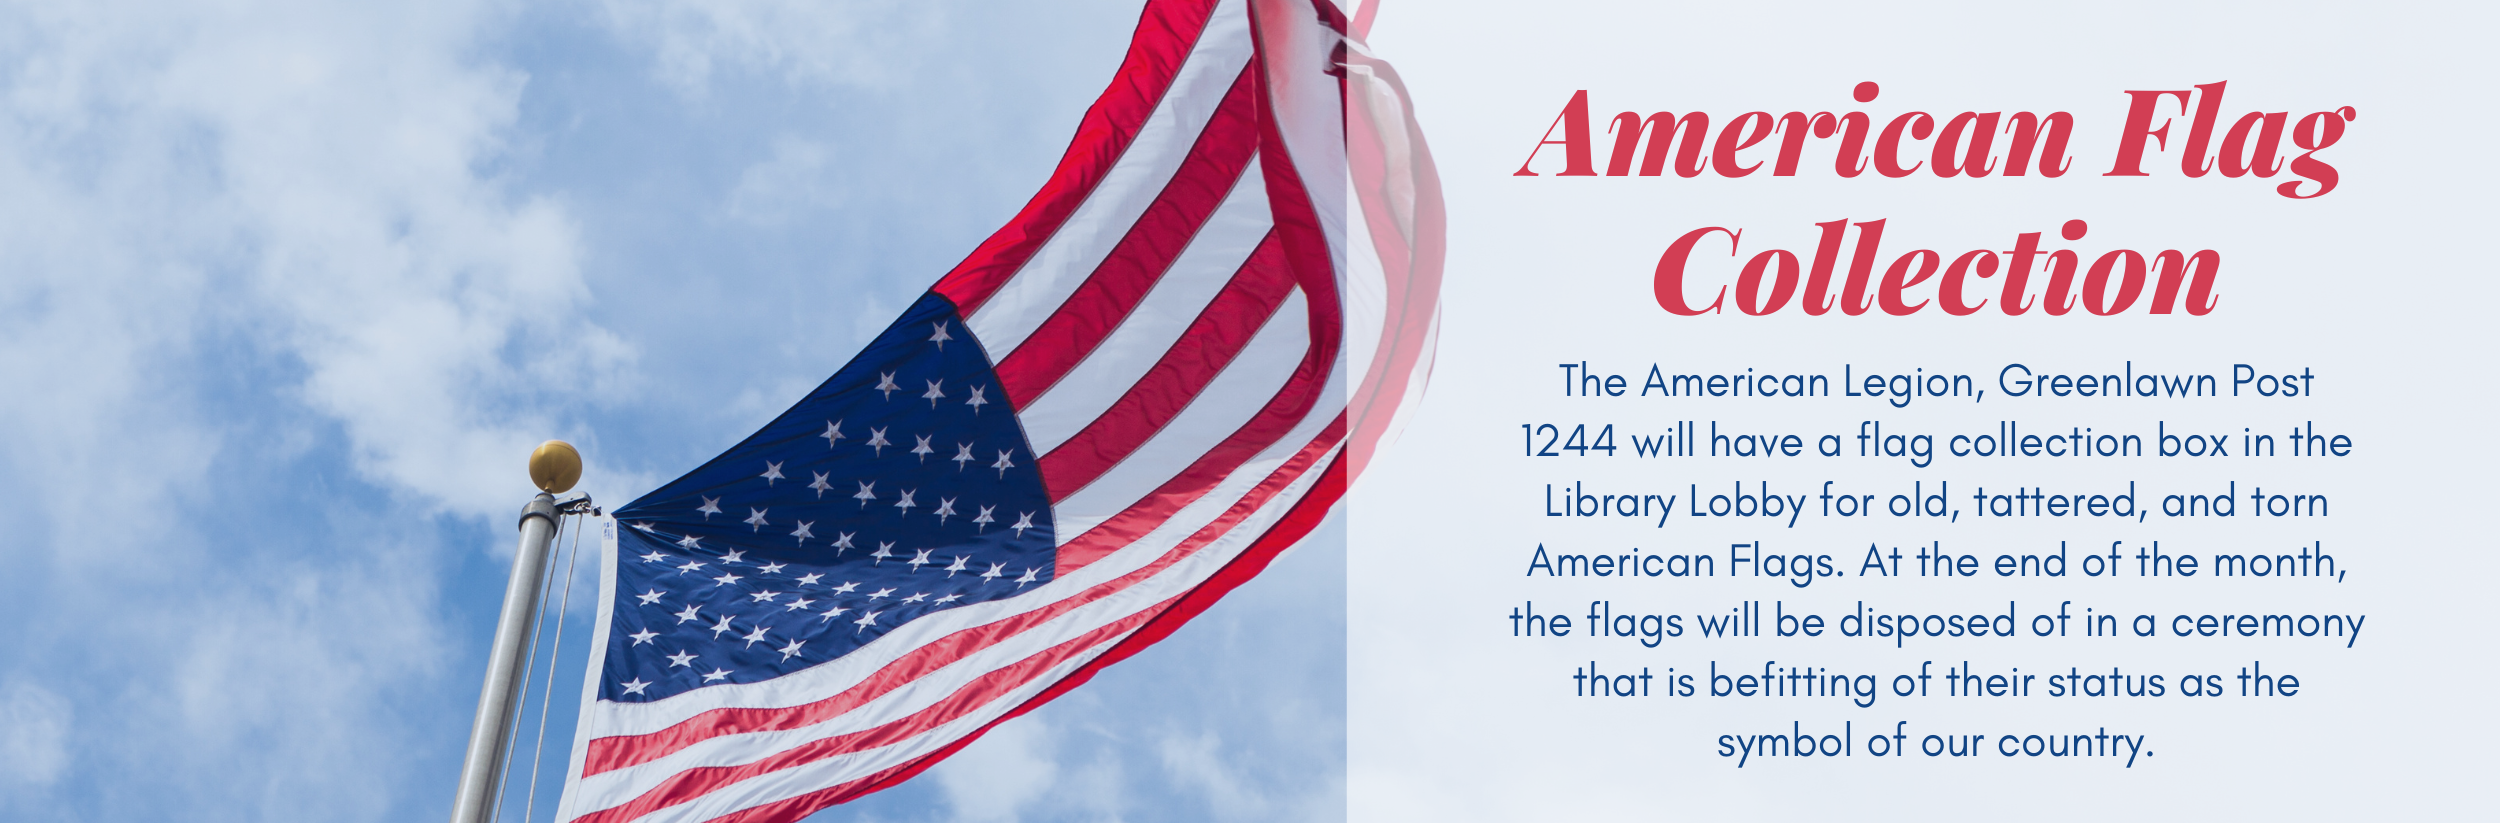 Image for "American Flag Collection Site"